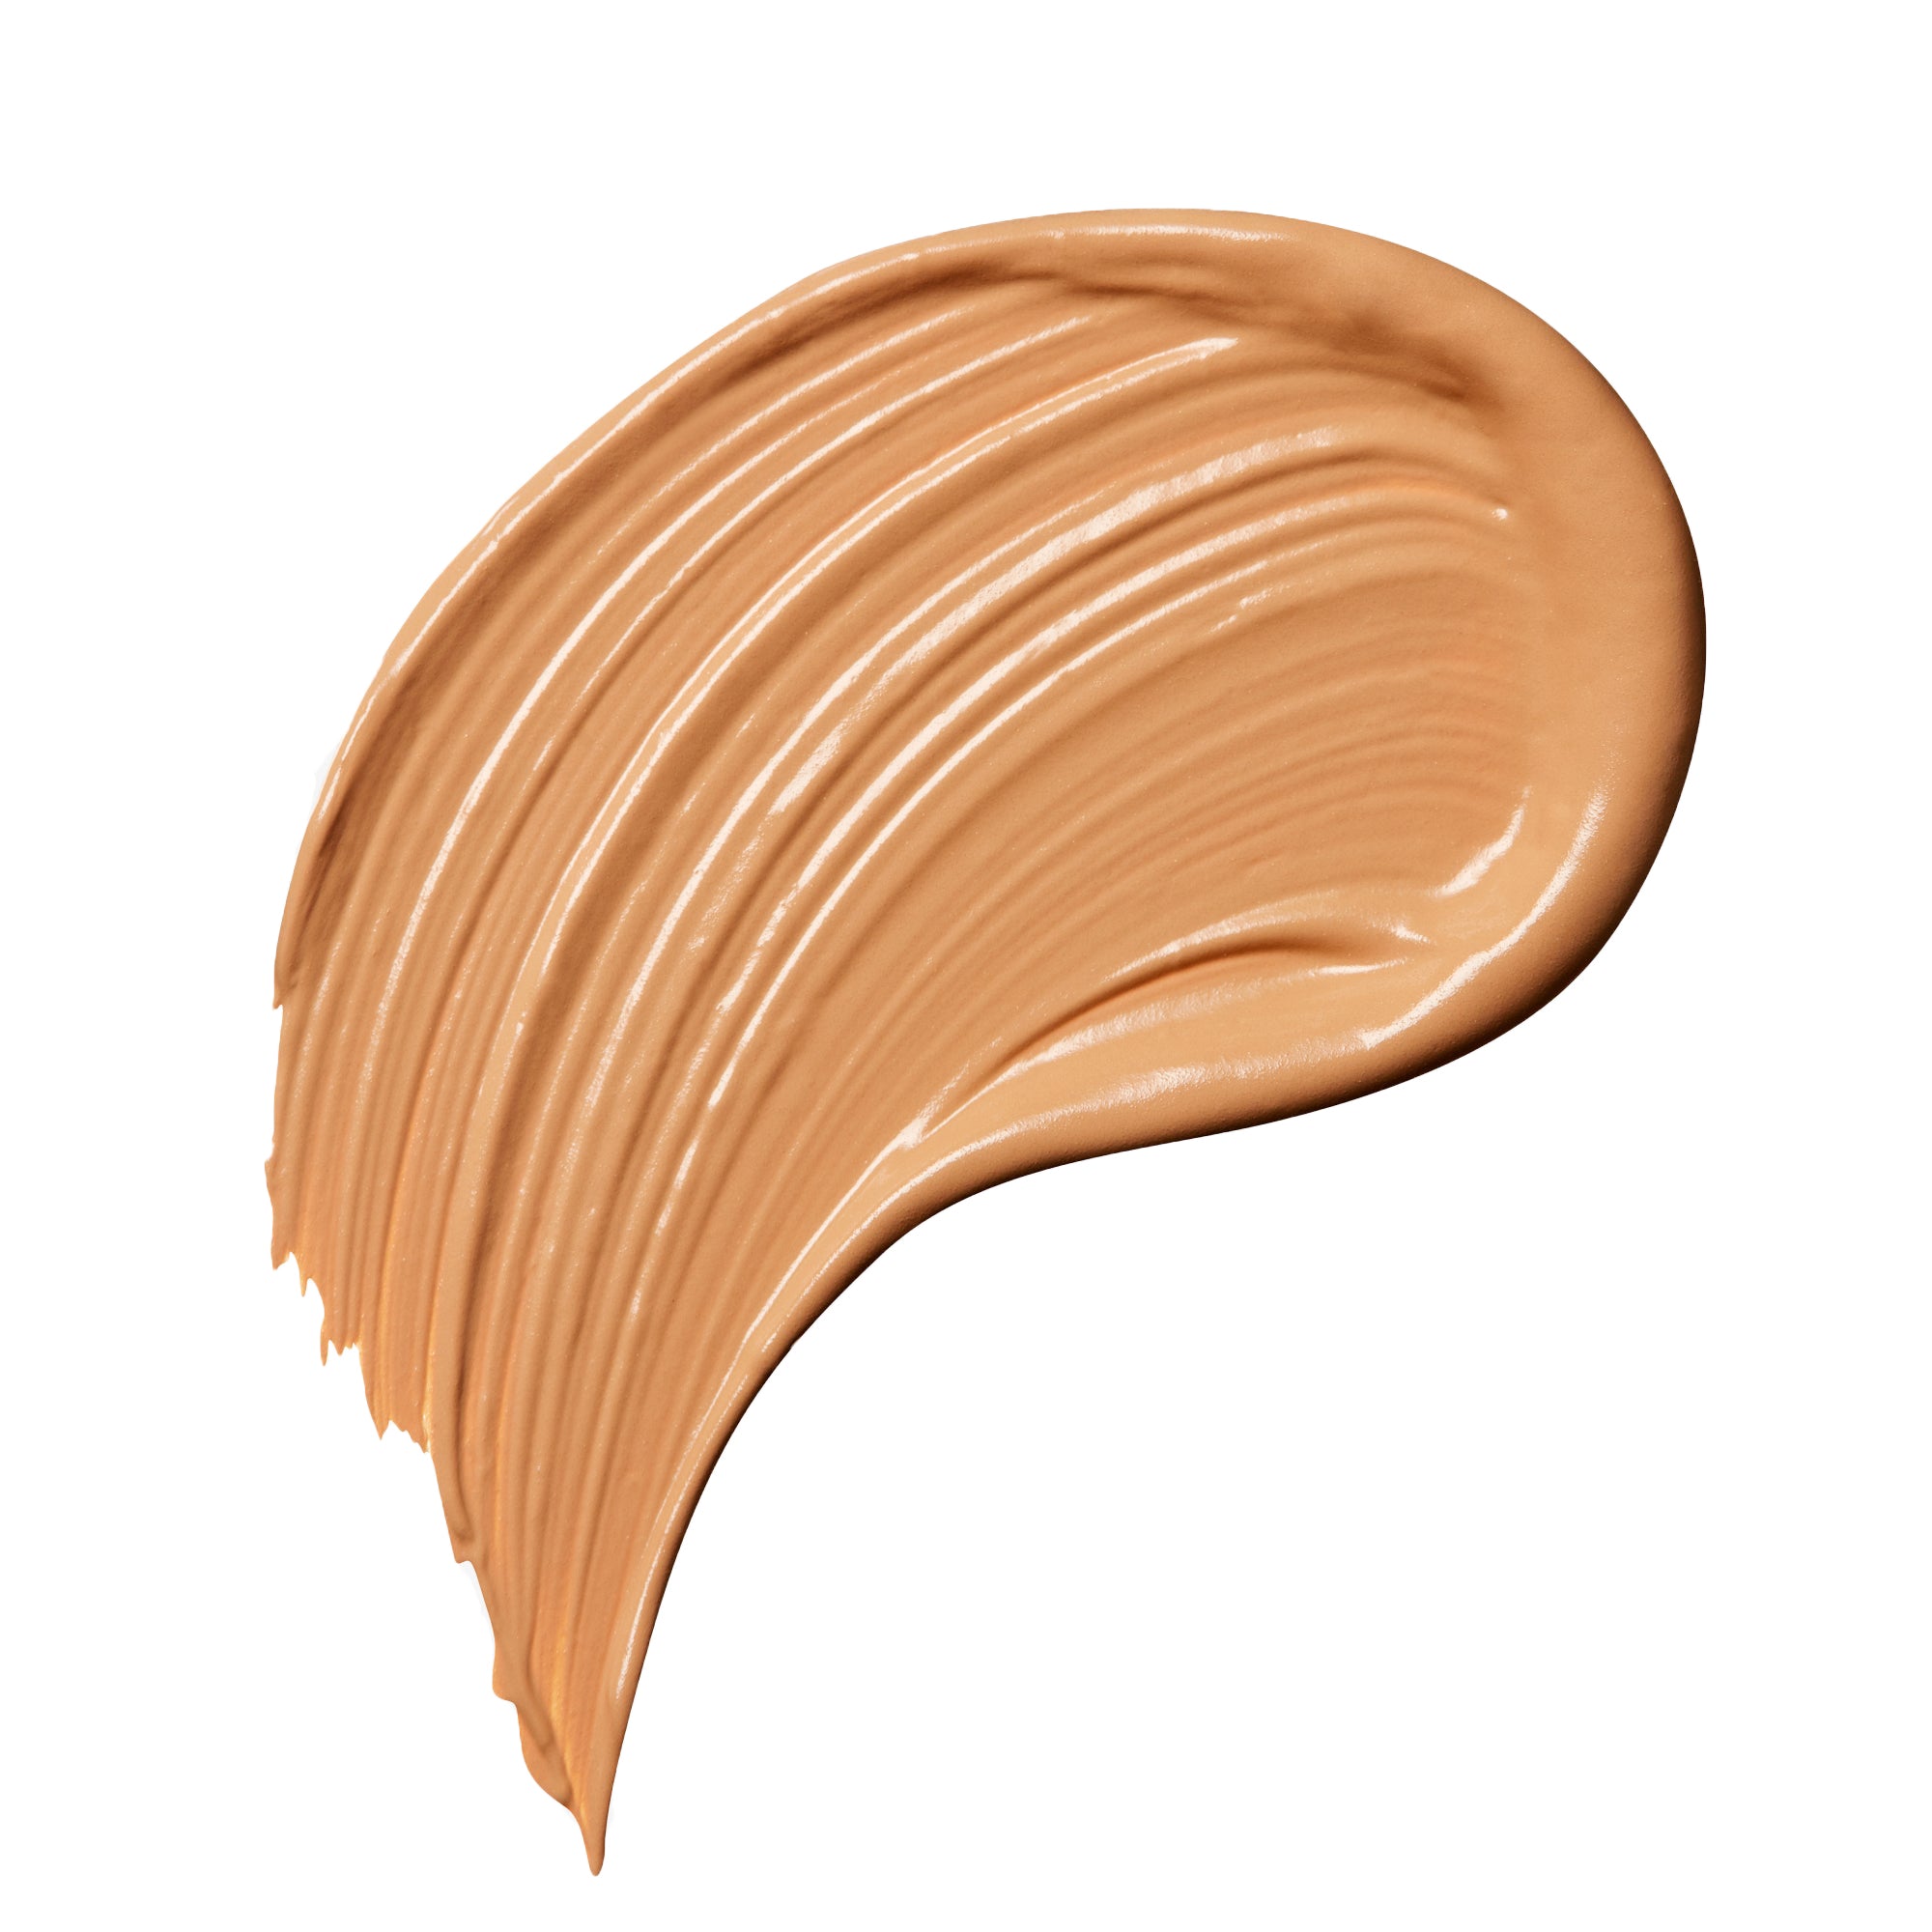 Rodial Glass Concealer / Shade 02 / Swatch